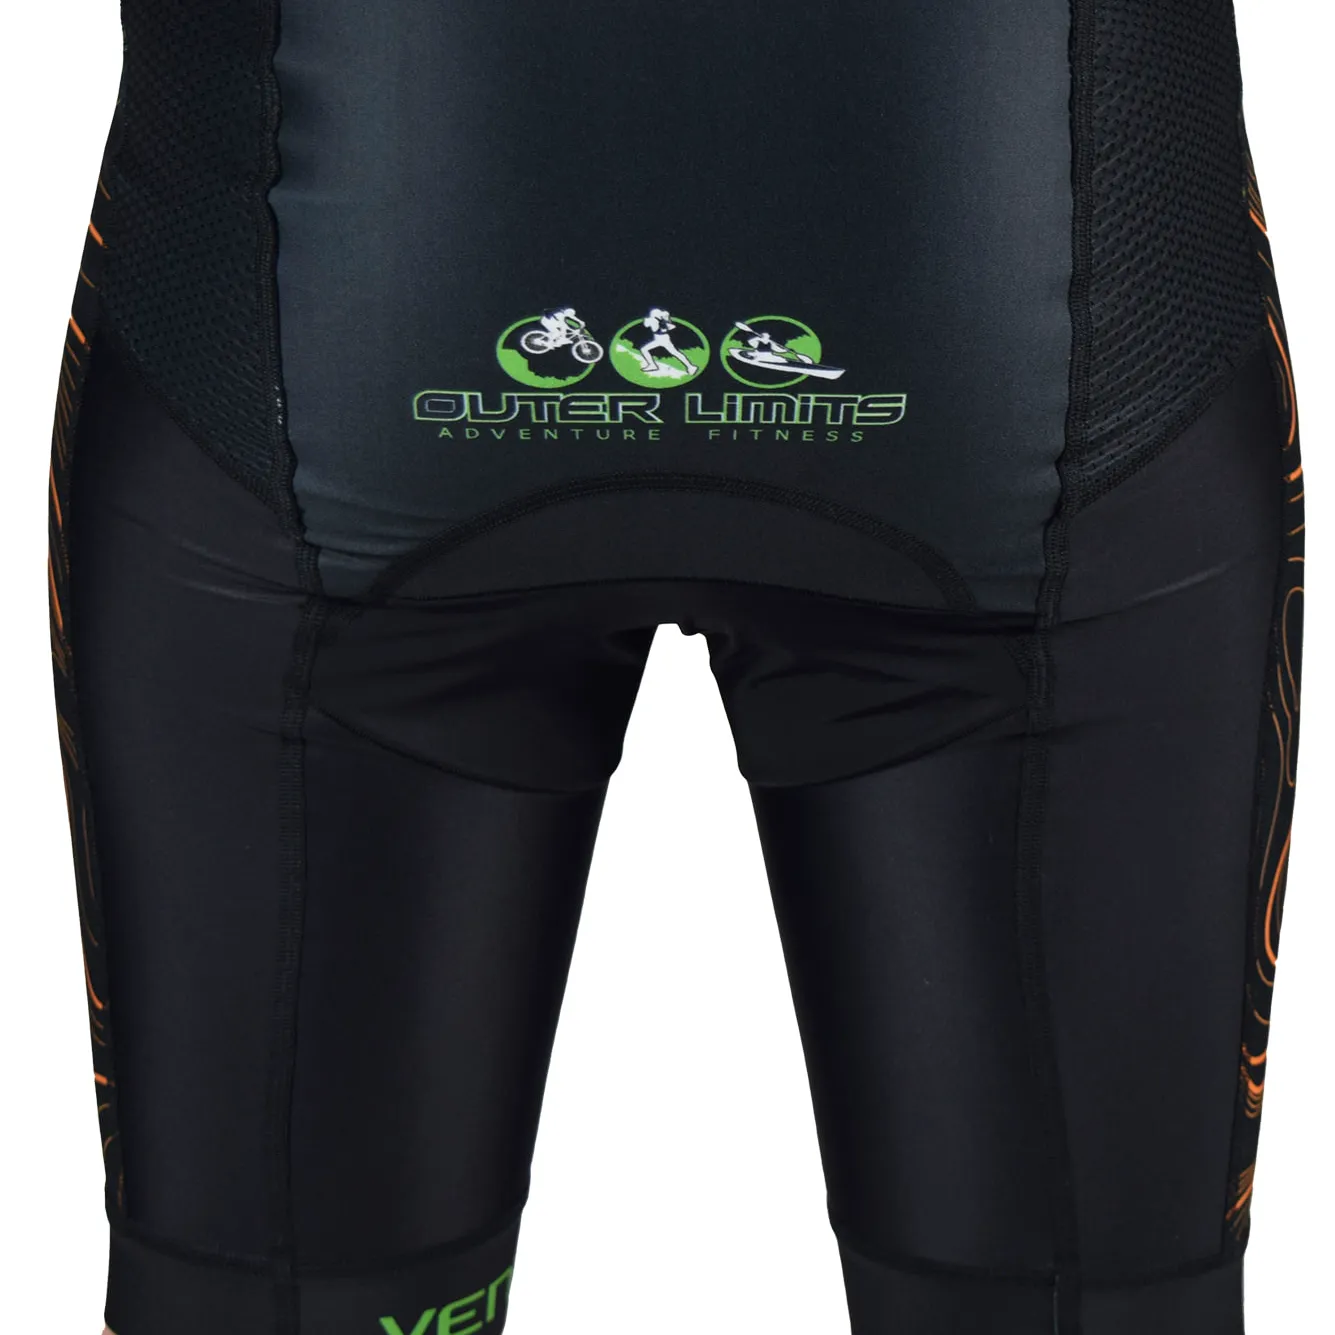 Outer Limits Tri Shorts Back